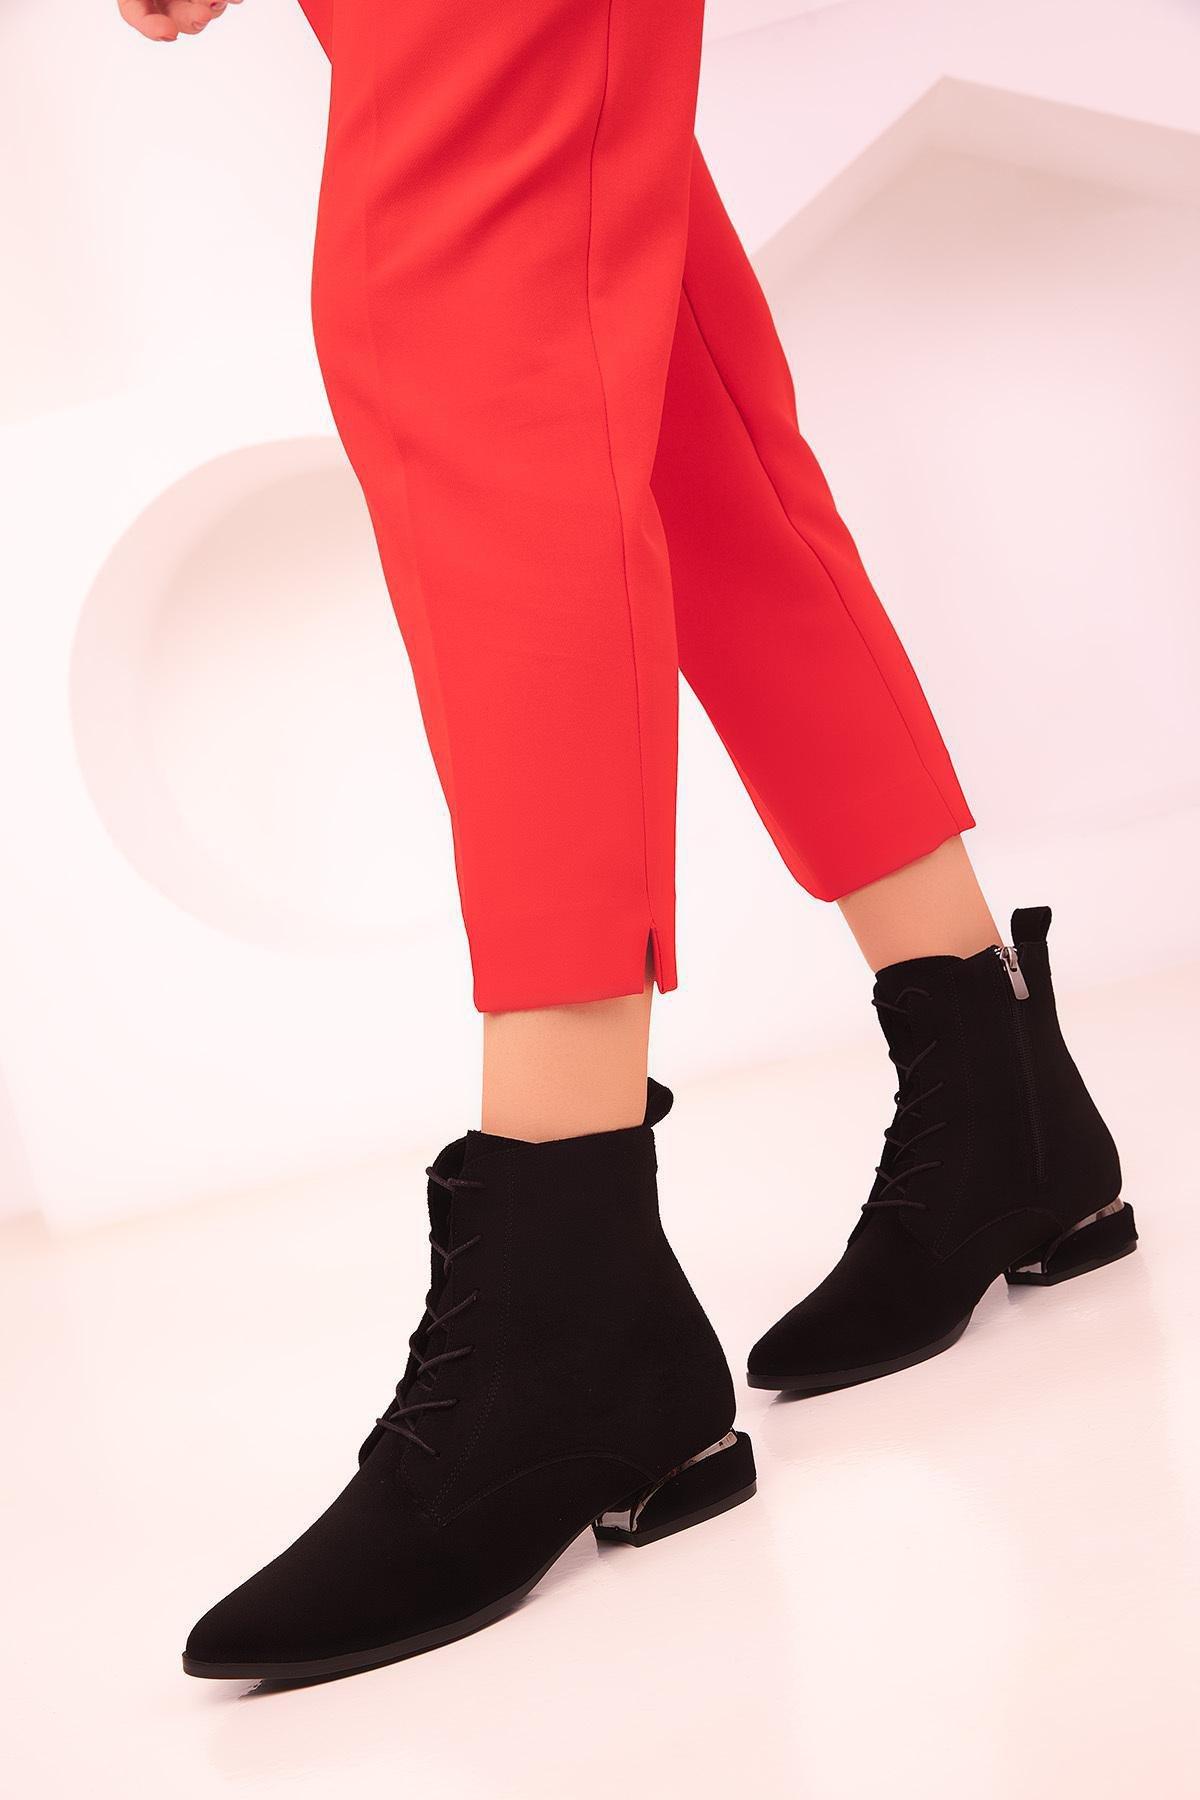 SOHO - Black Lace-Up Suede Boots